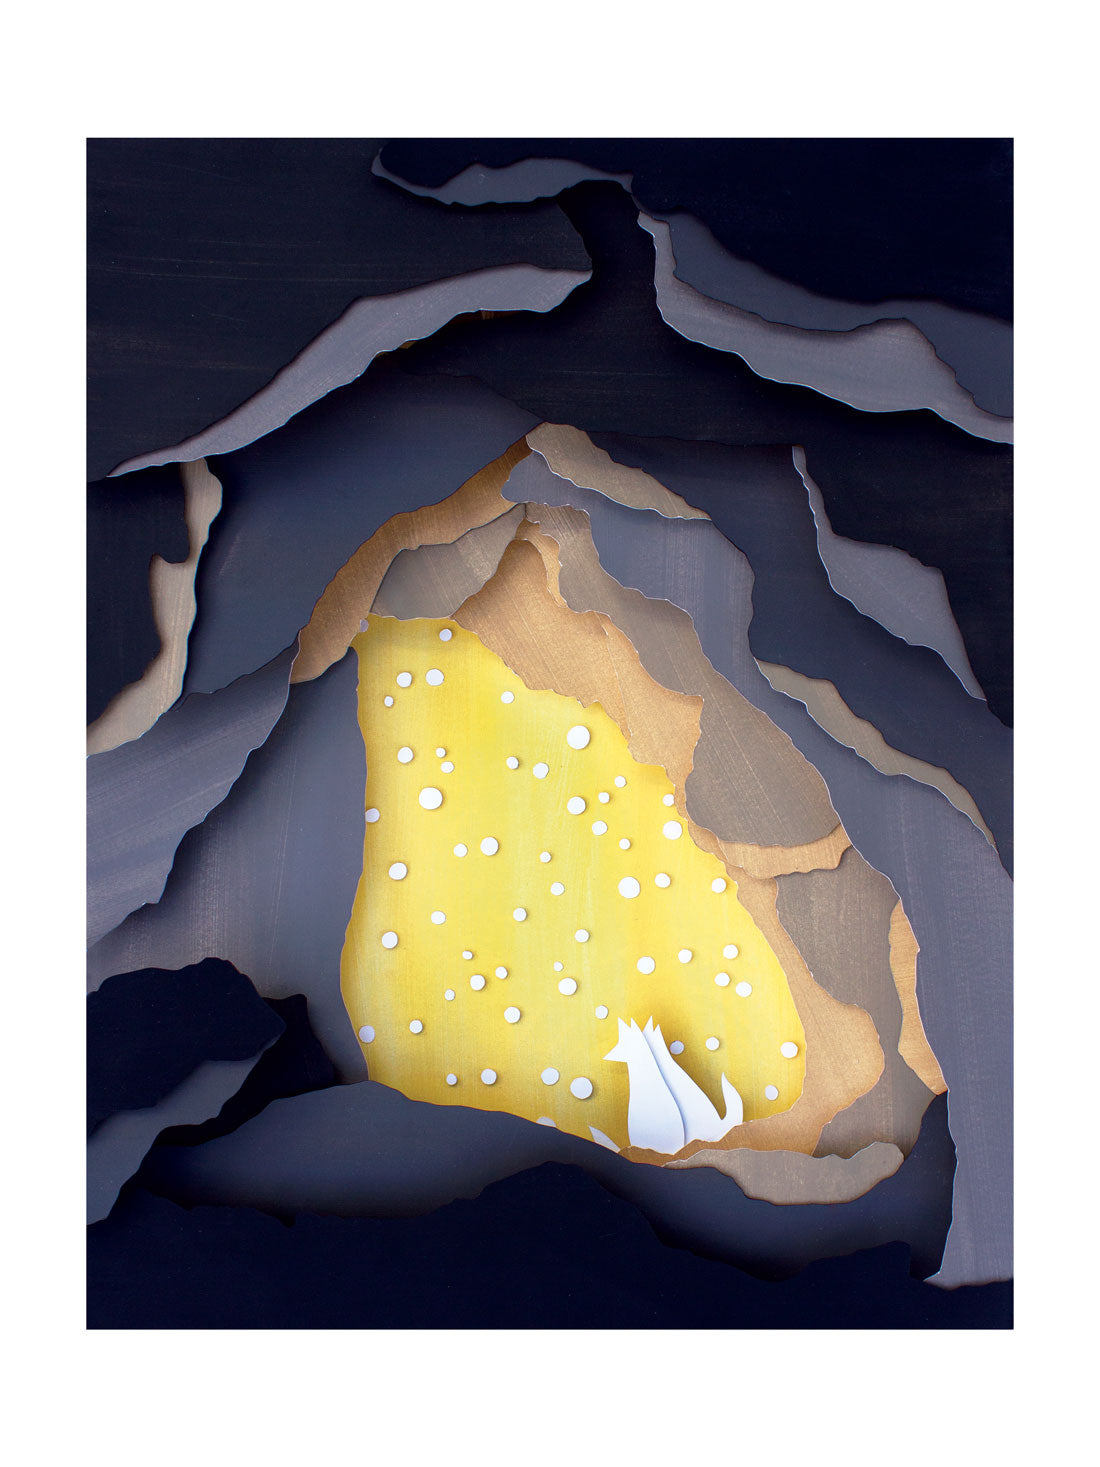 Archival print of cut paper illustration of cute scene with two foxes cuddling in a backlit snowy cave.